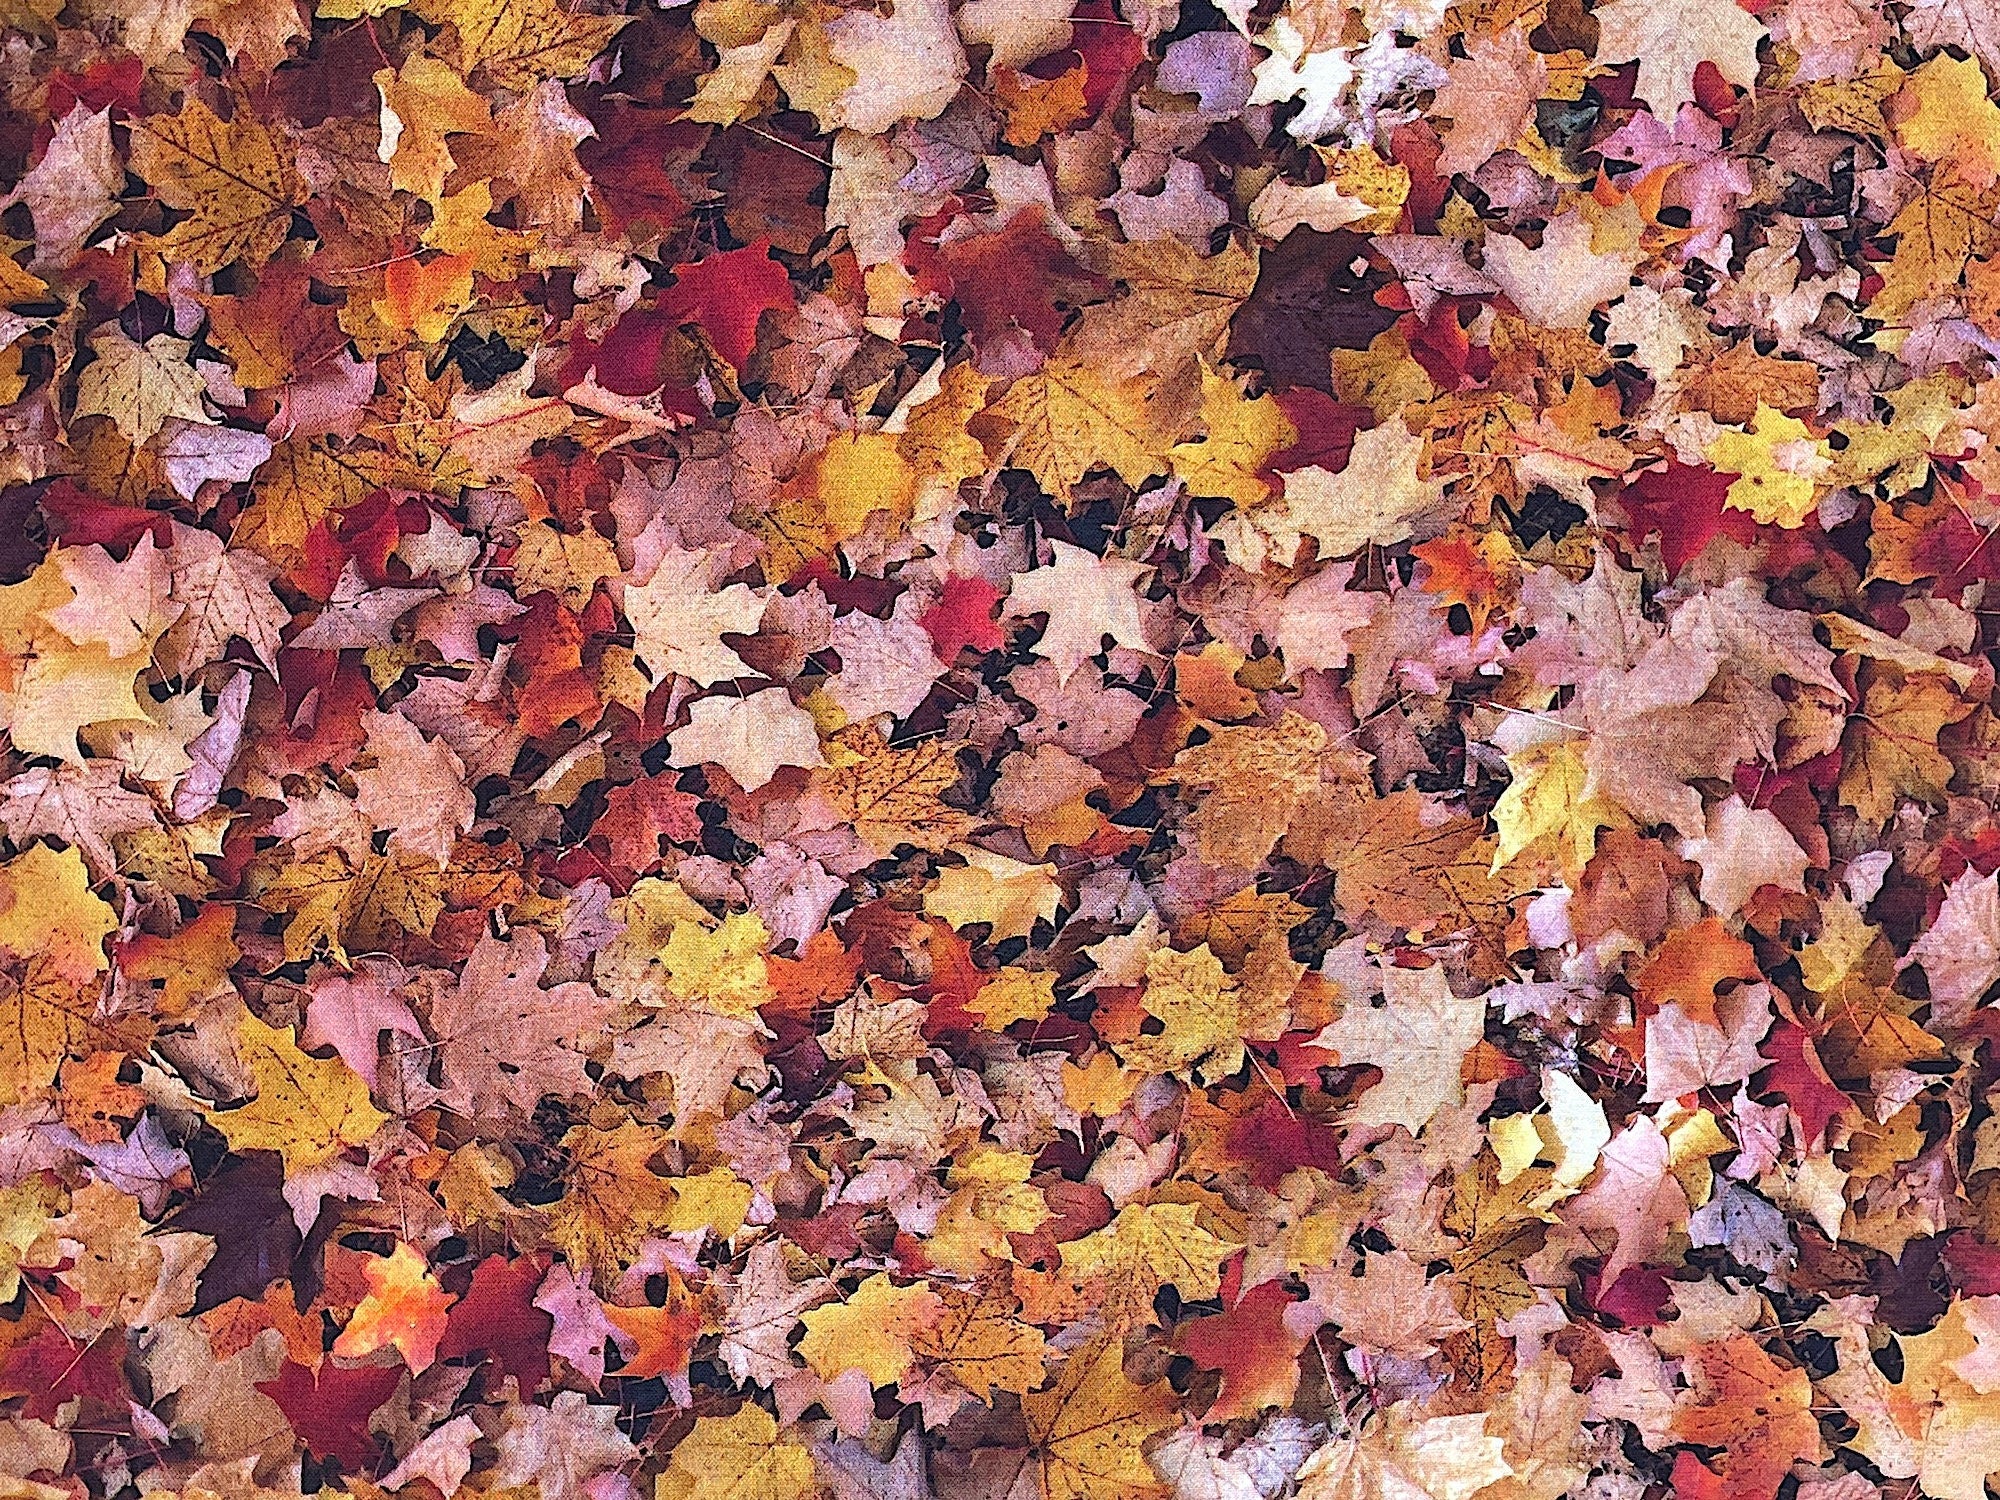 This cotton fabric is covered with brown, yellow, red and orange leaves